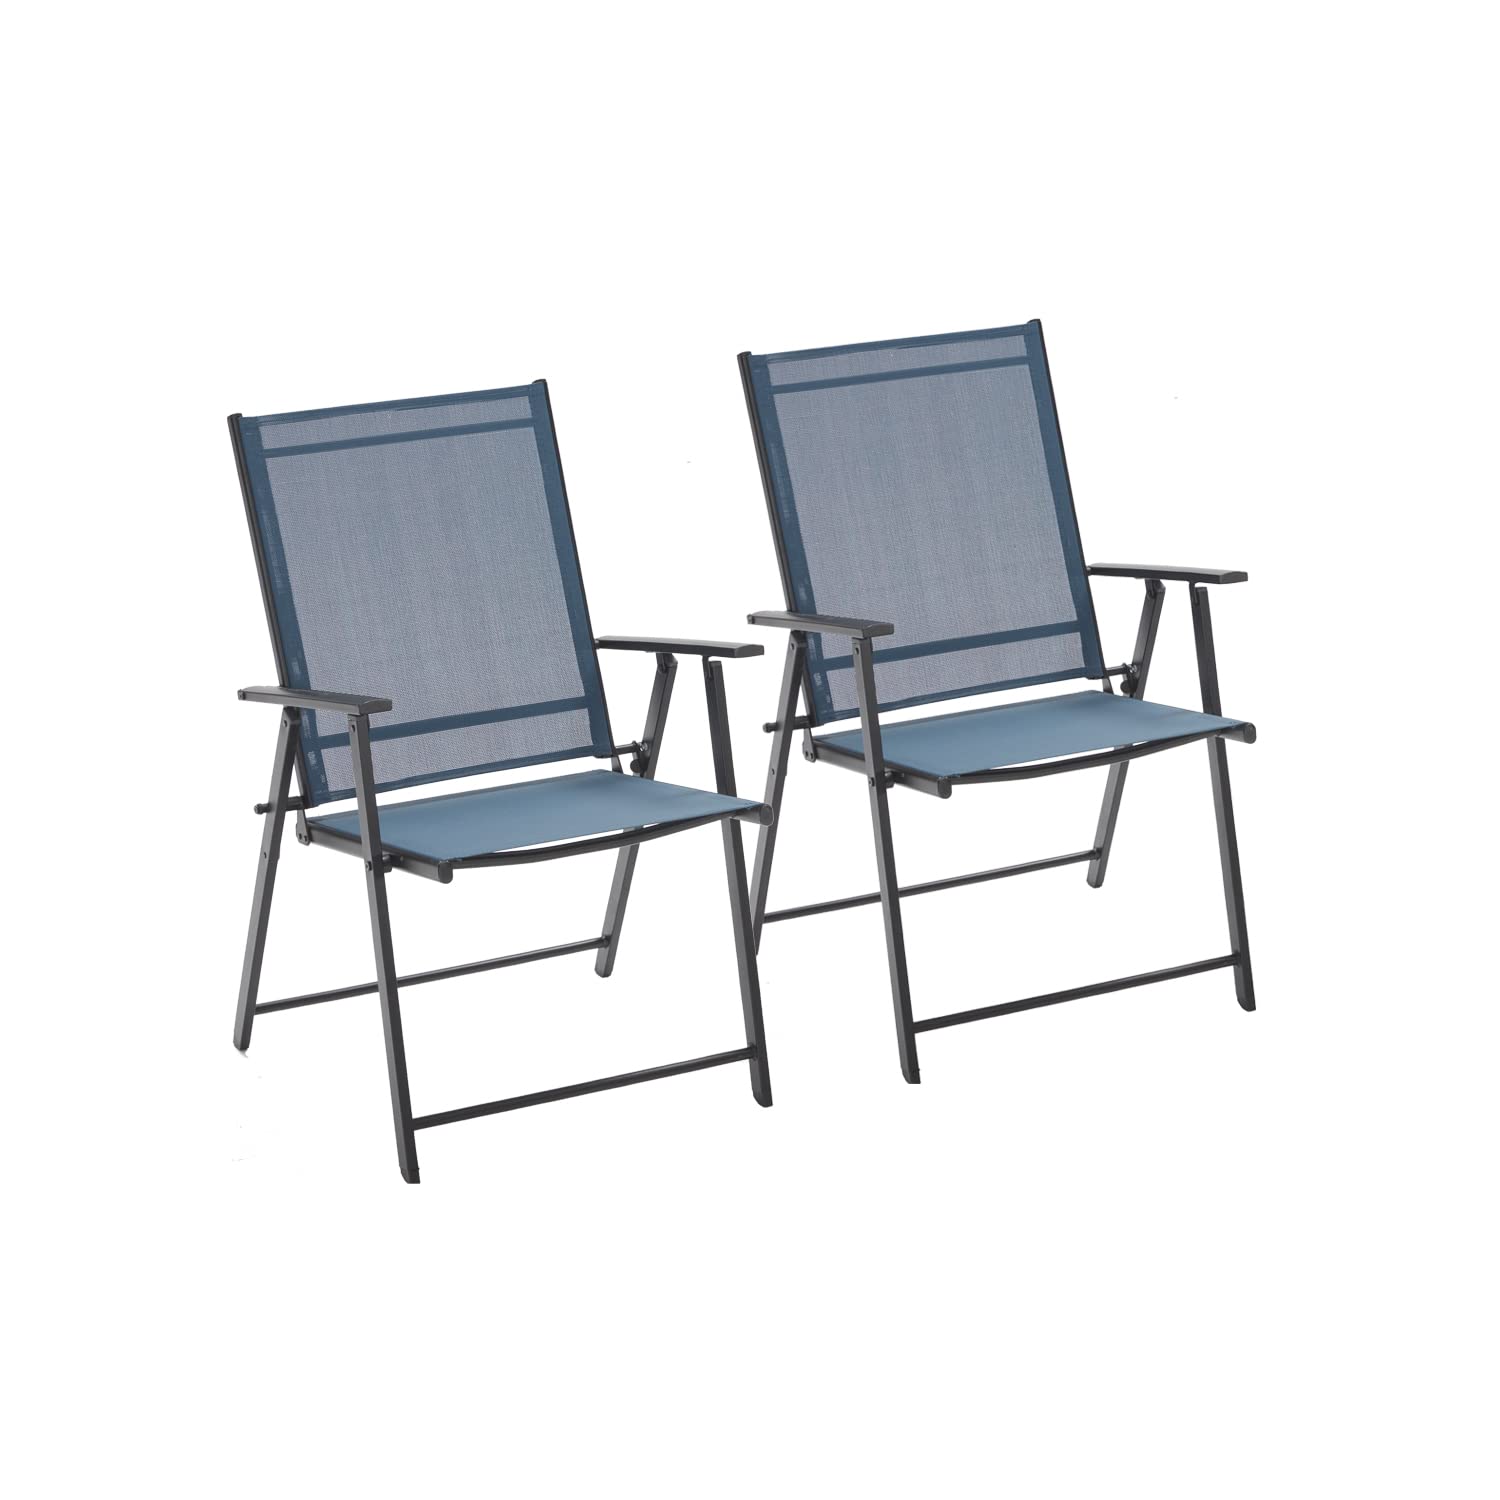 Vicllax Patio Folding Chairs Set of 2/4/6, Outdoor Portable Sling Lawn Chairs